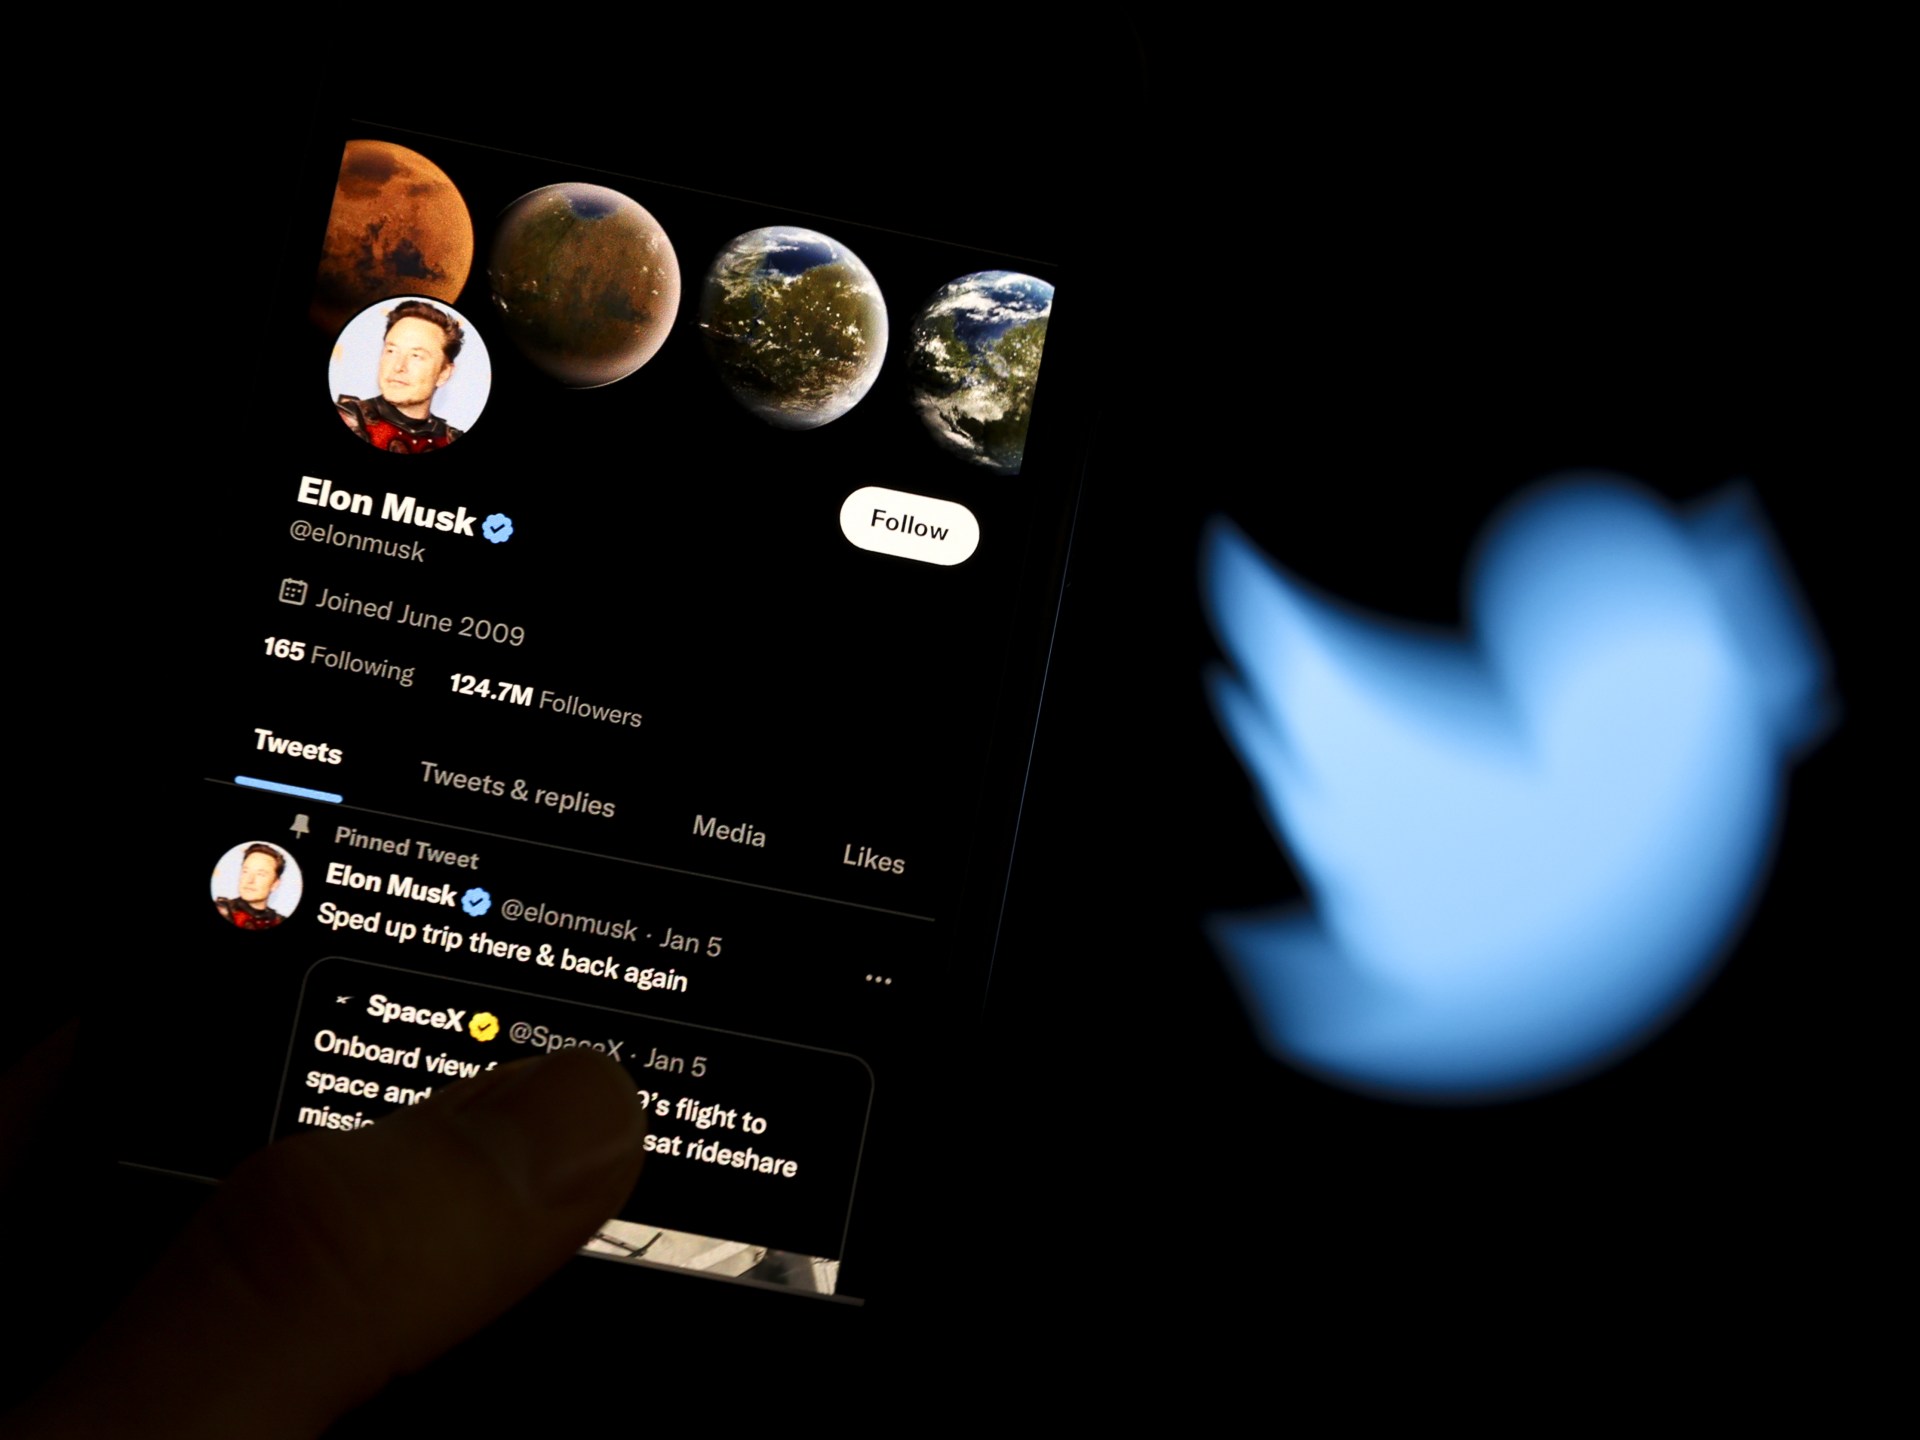 Twitter celebrities are reluctant to pay for the blue check mark